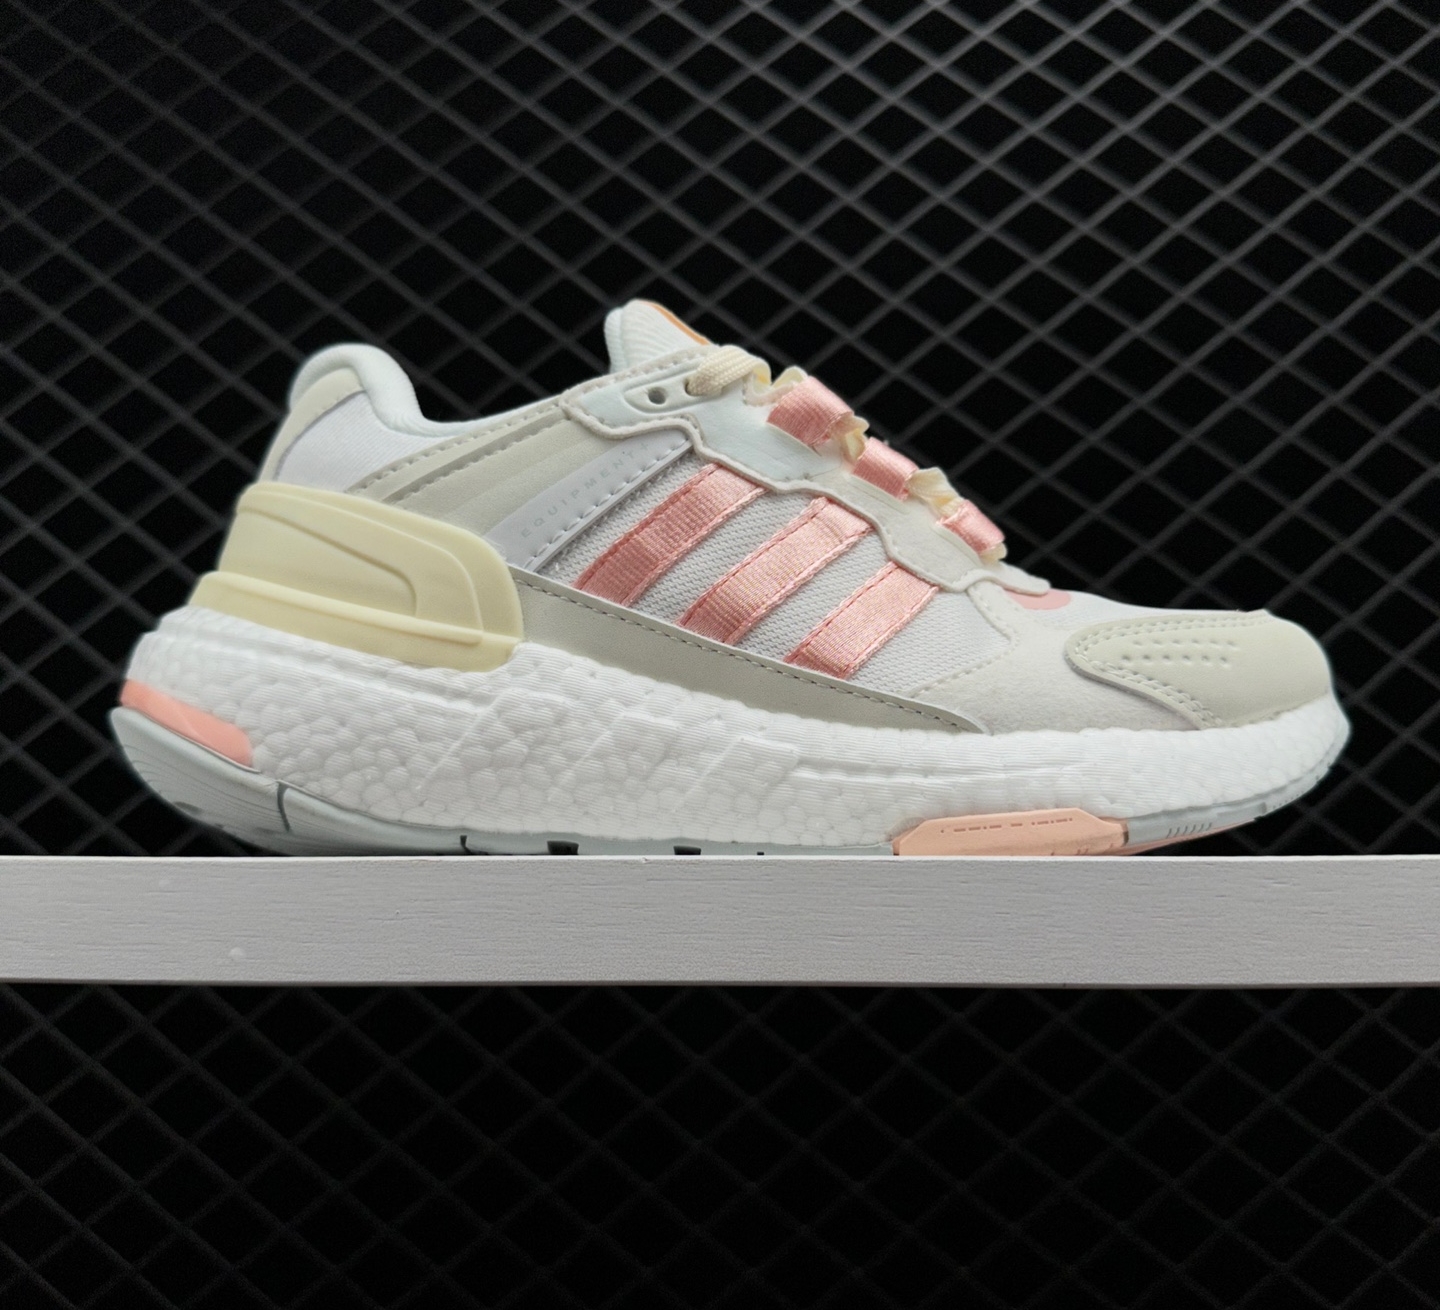 Adidas EQUIPMENT Cloud White Grey Pink GX6631 - Trendy and Stylish Athletic Shoes